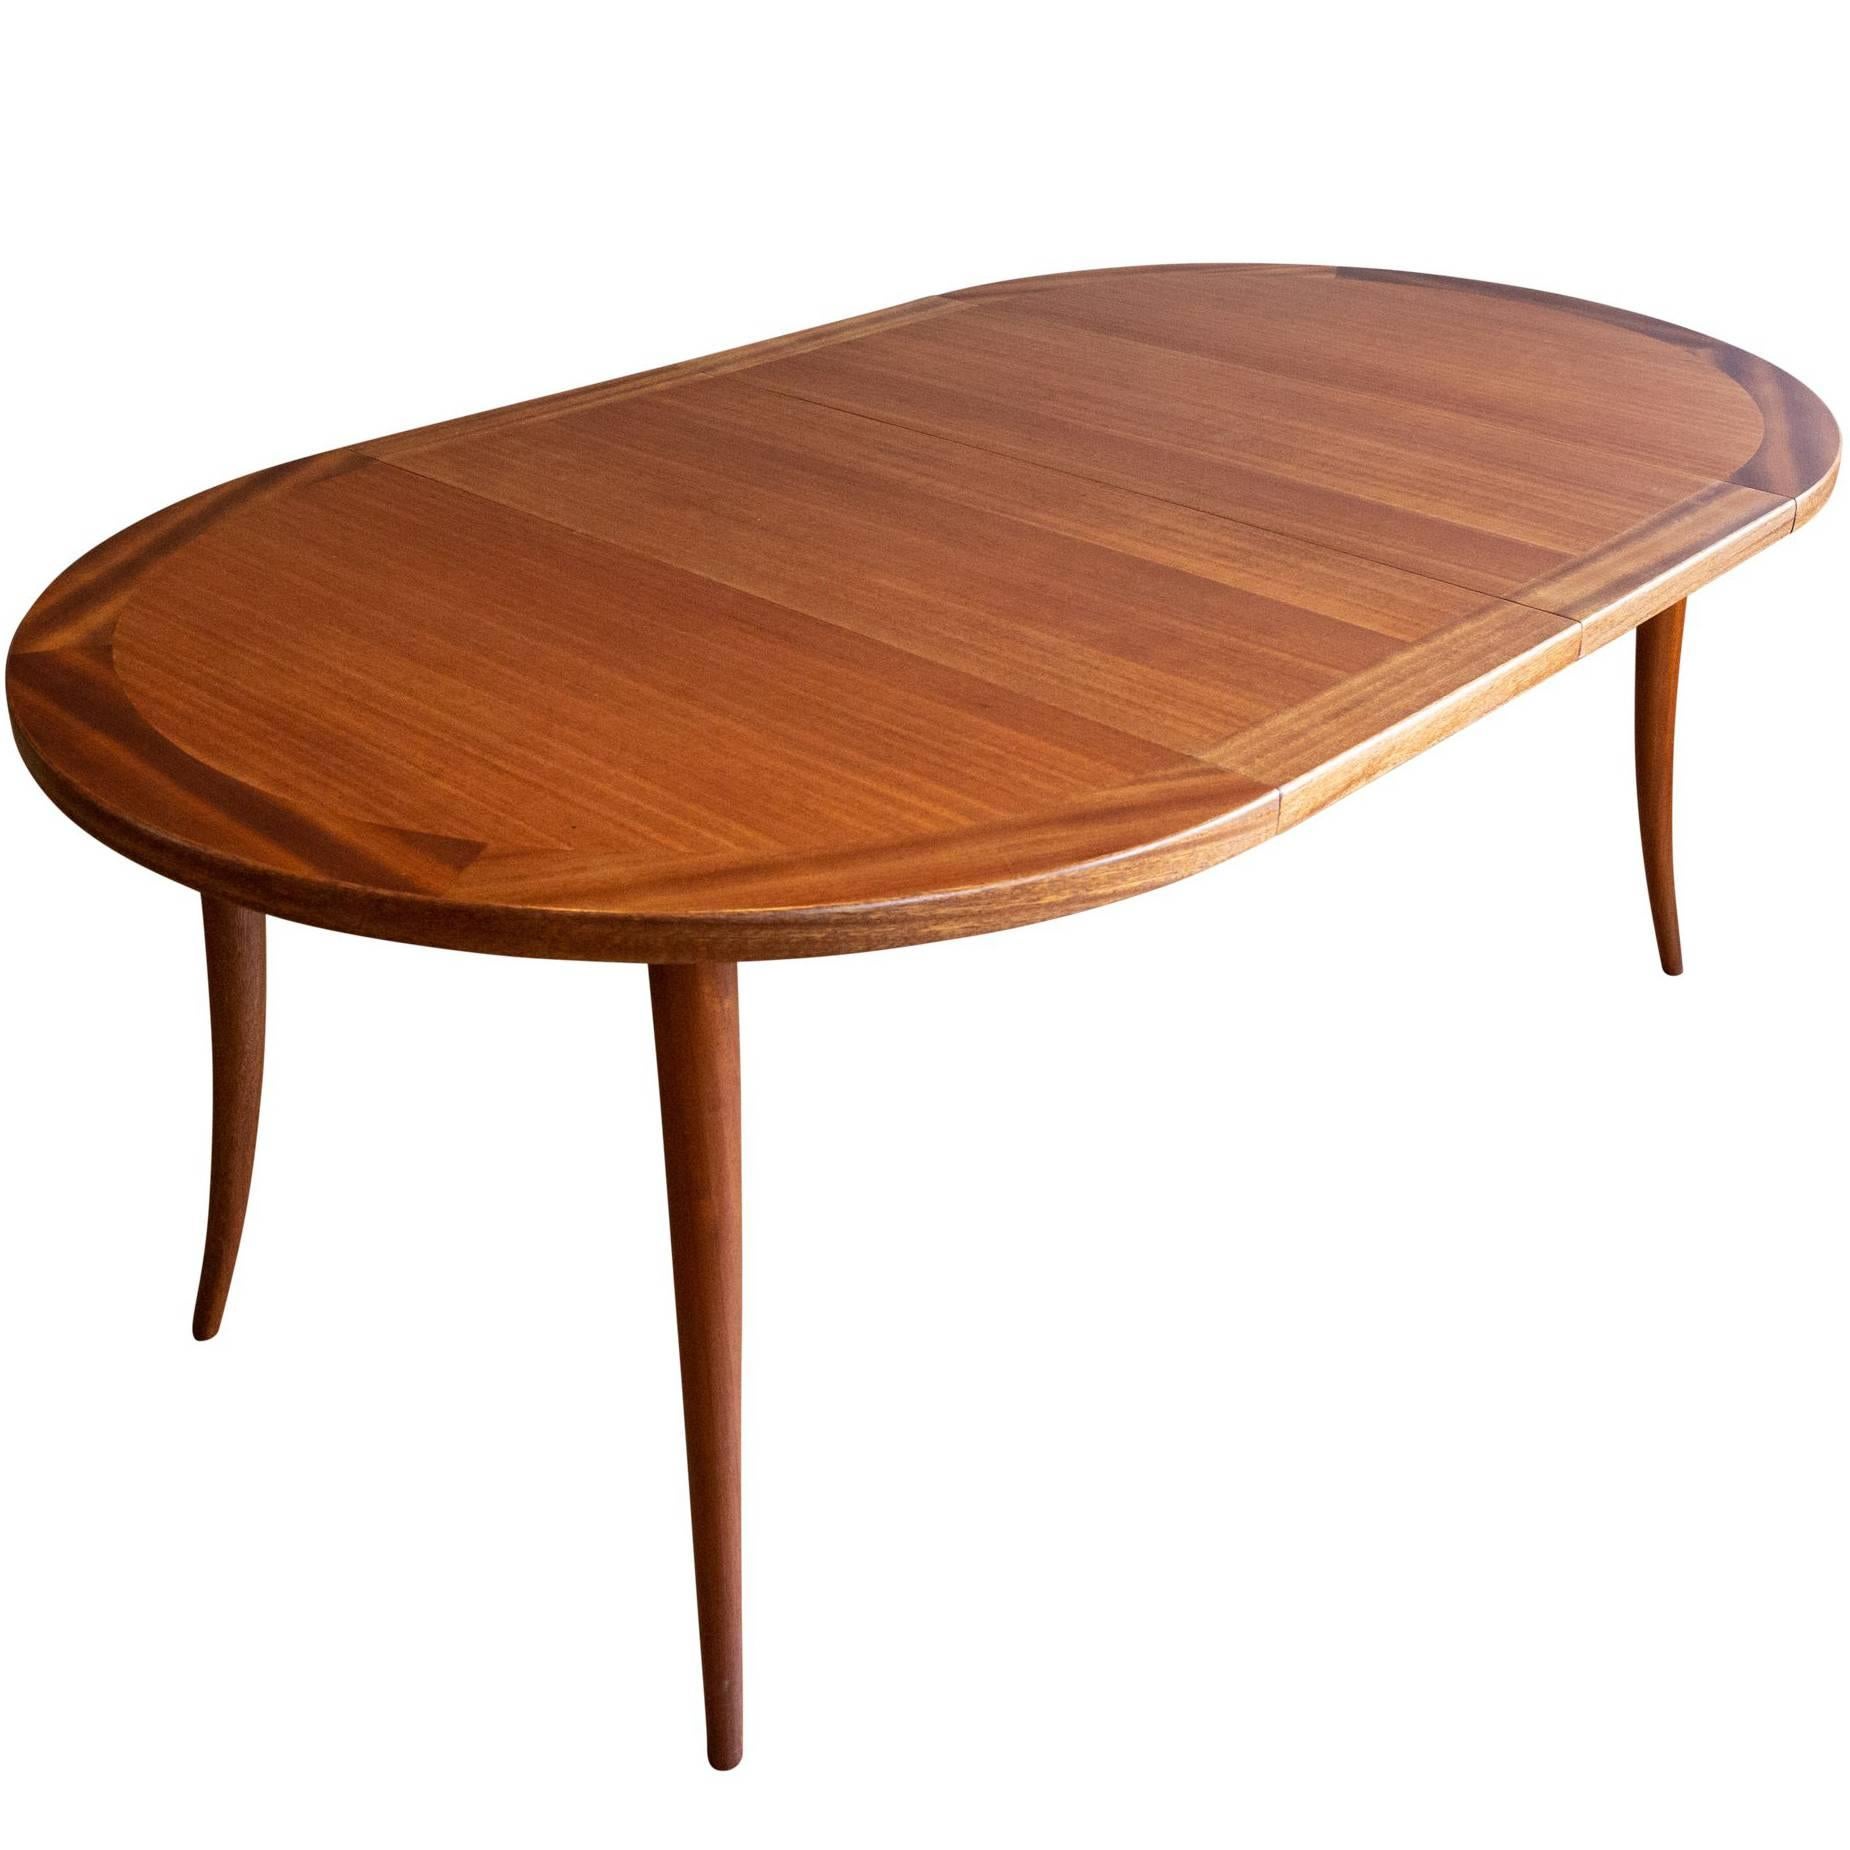 Bleached Mahogany Dining Table by Harvey Probber